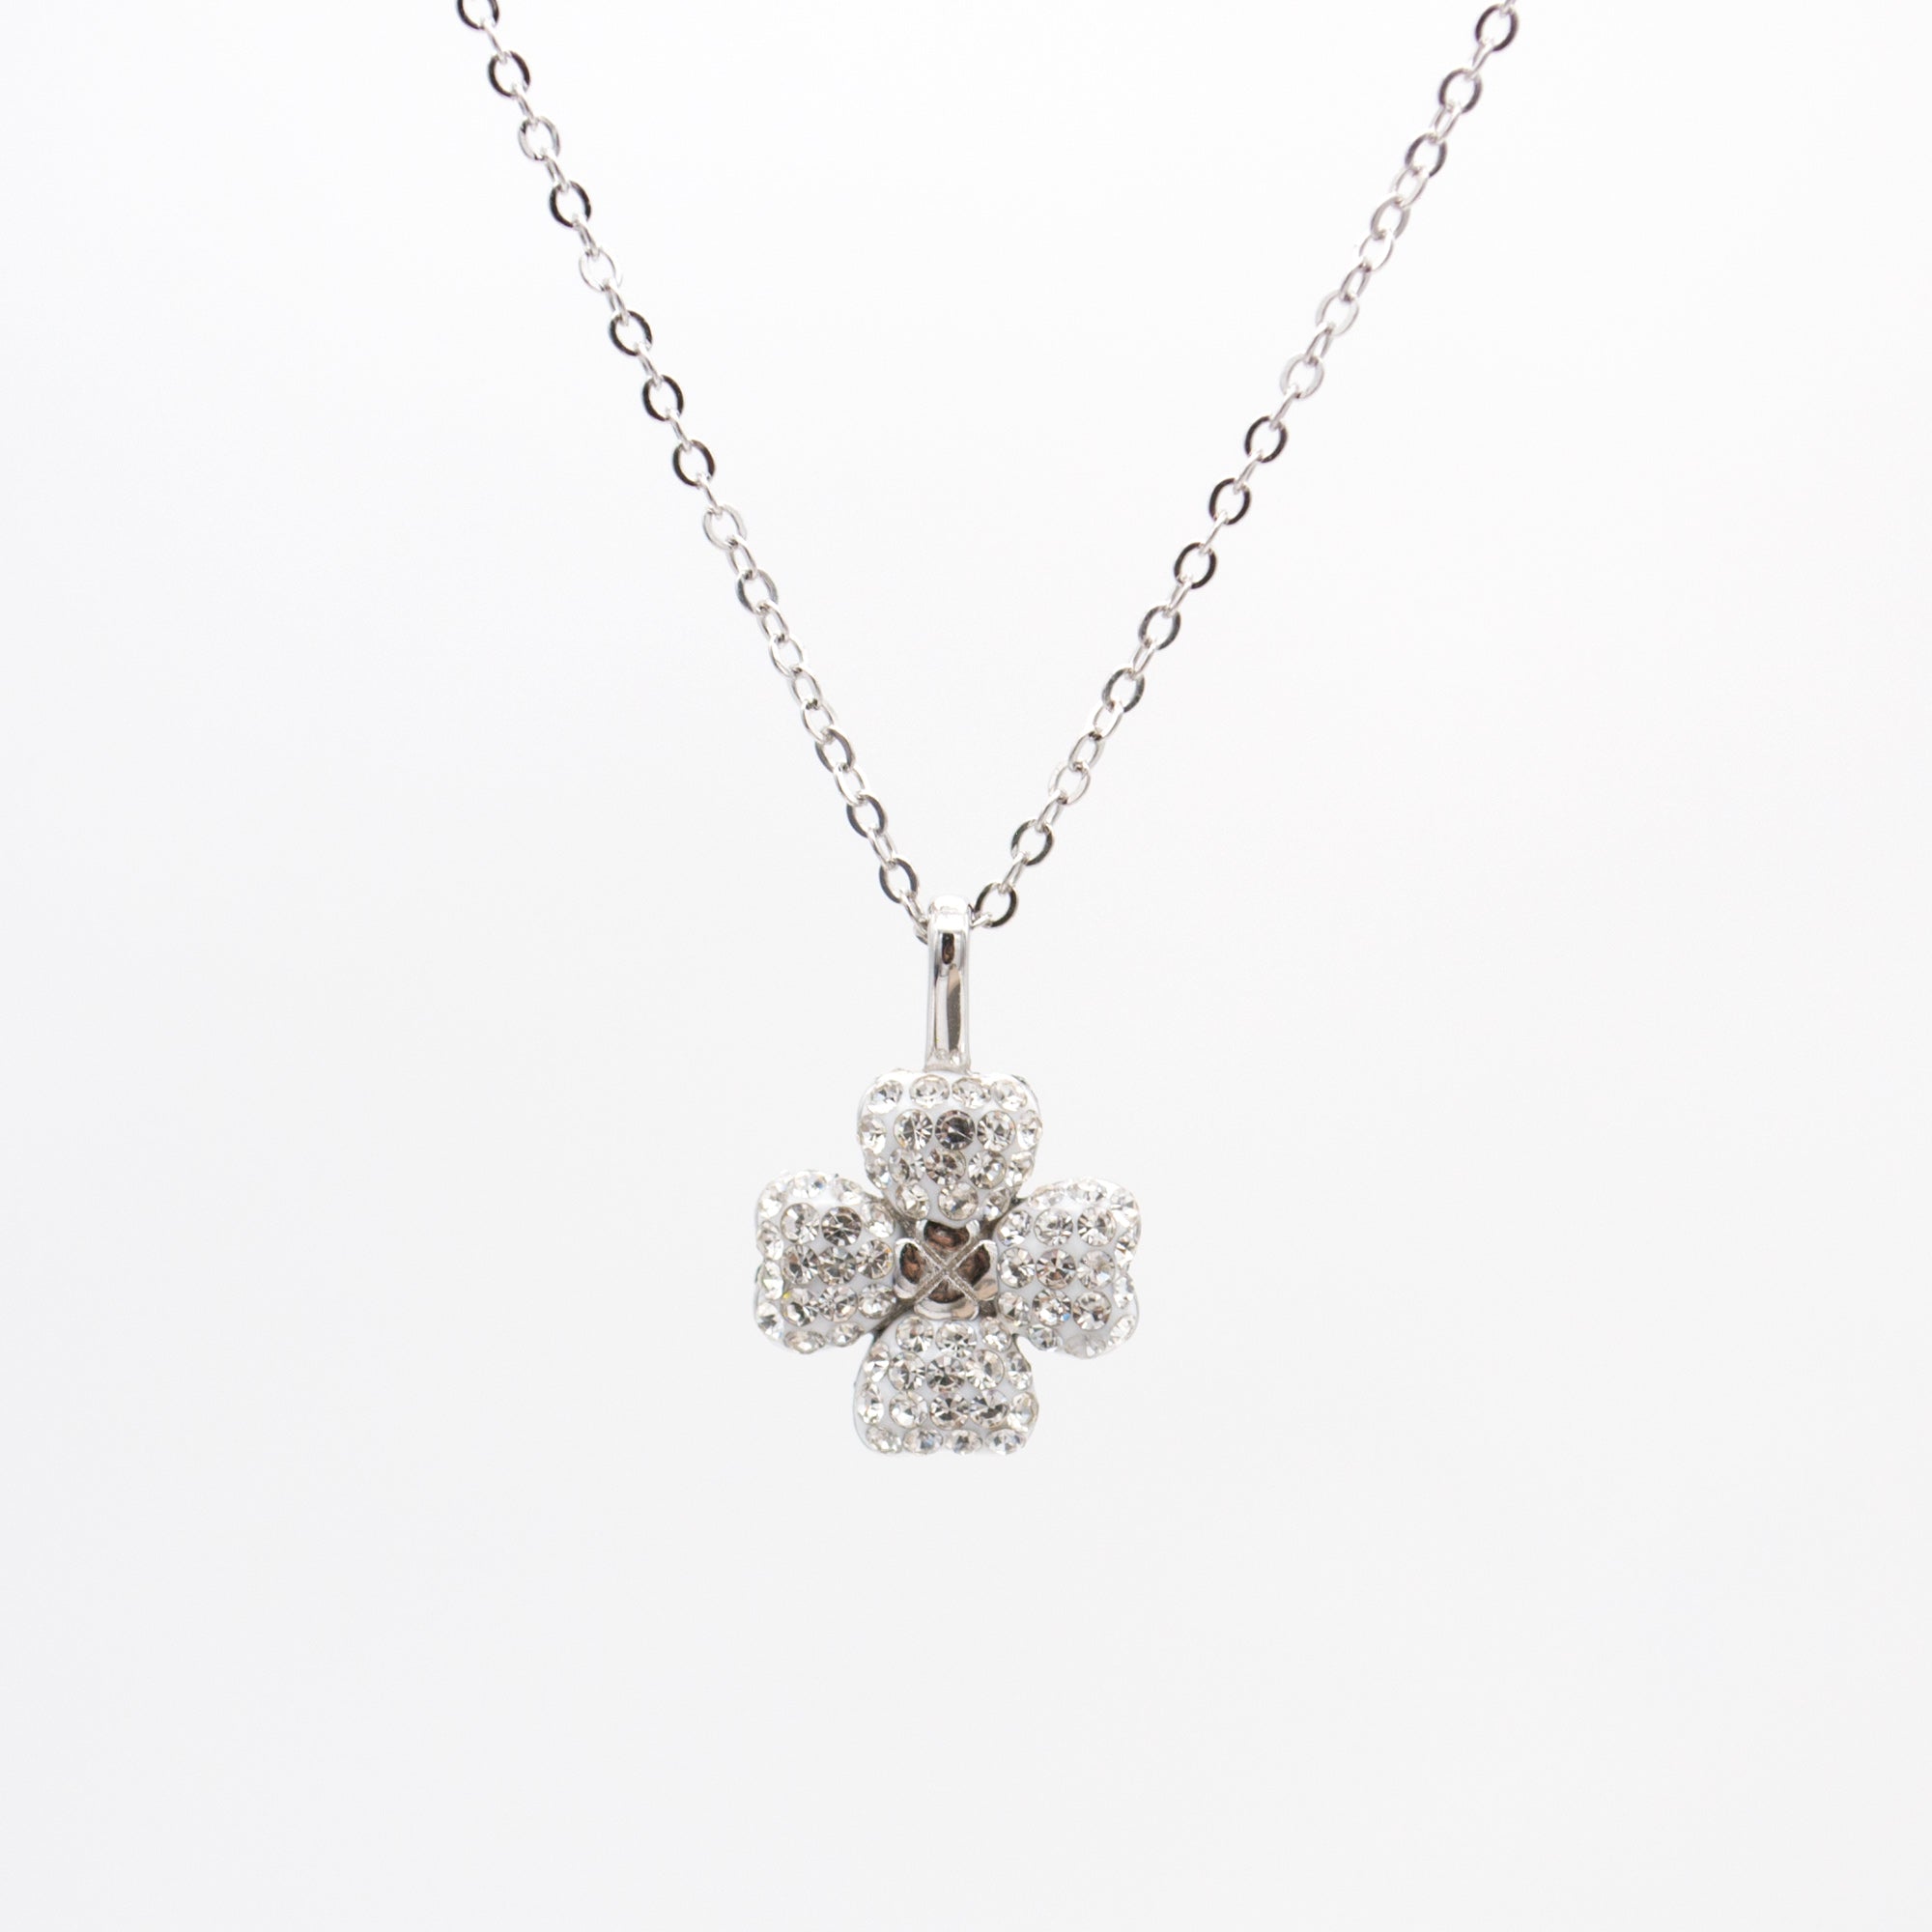 Jewdii 925 sterling silver Clover necklace with crystal